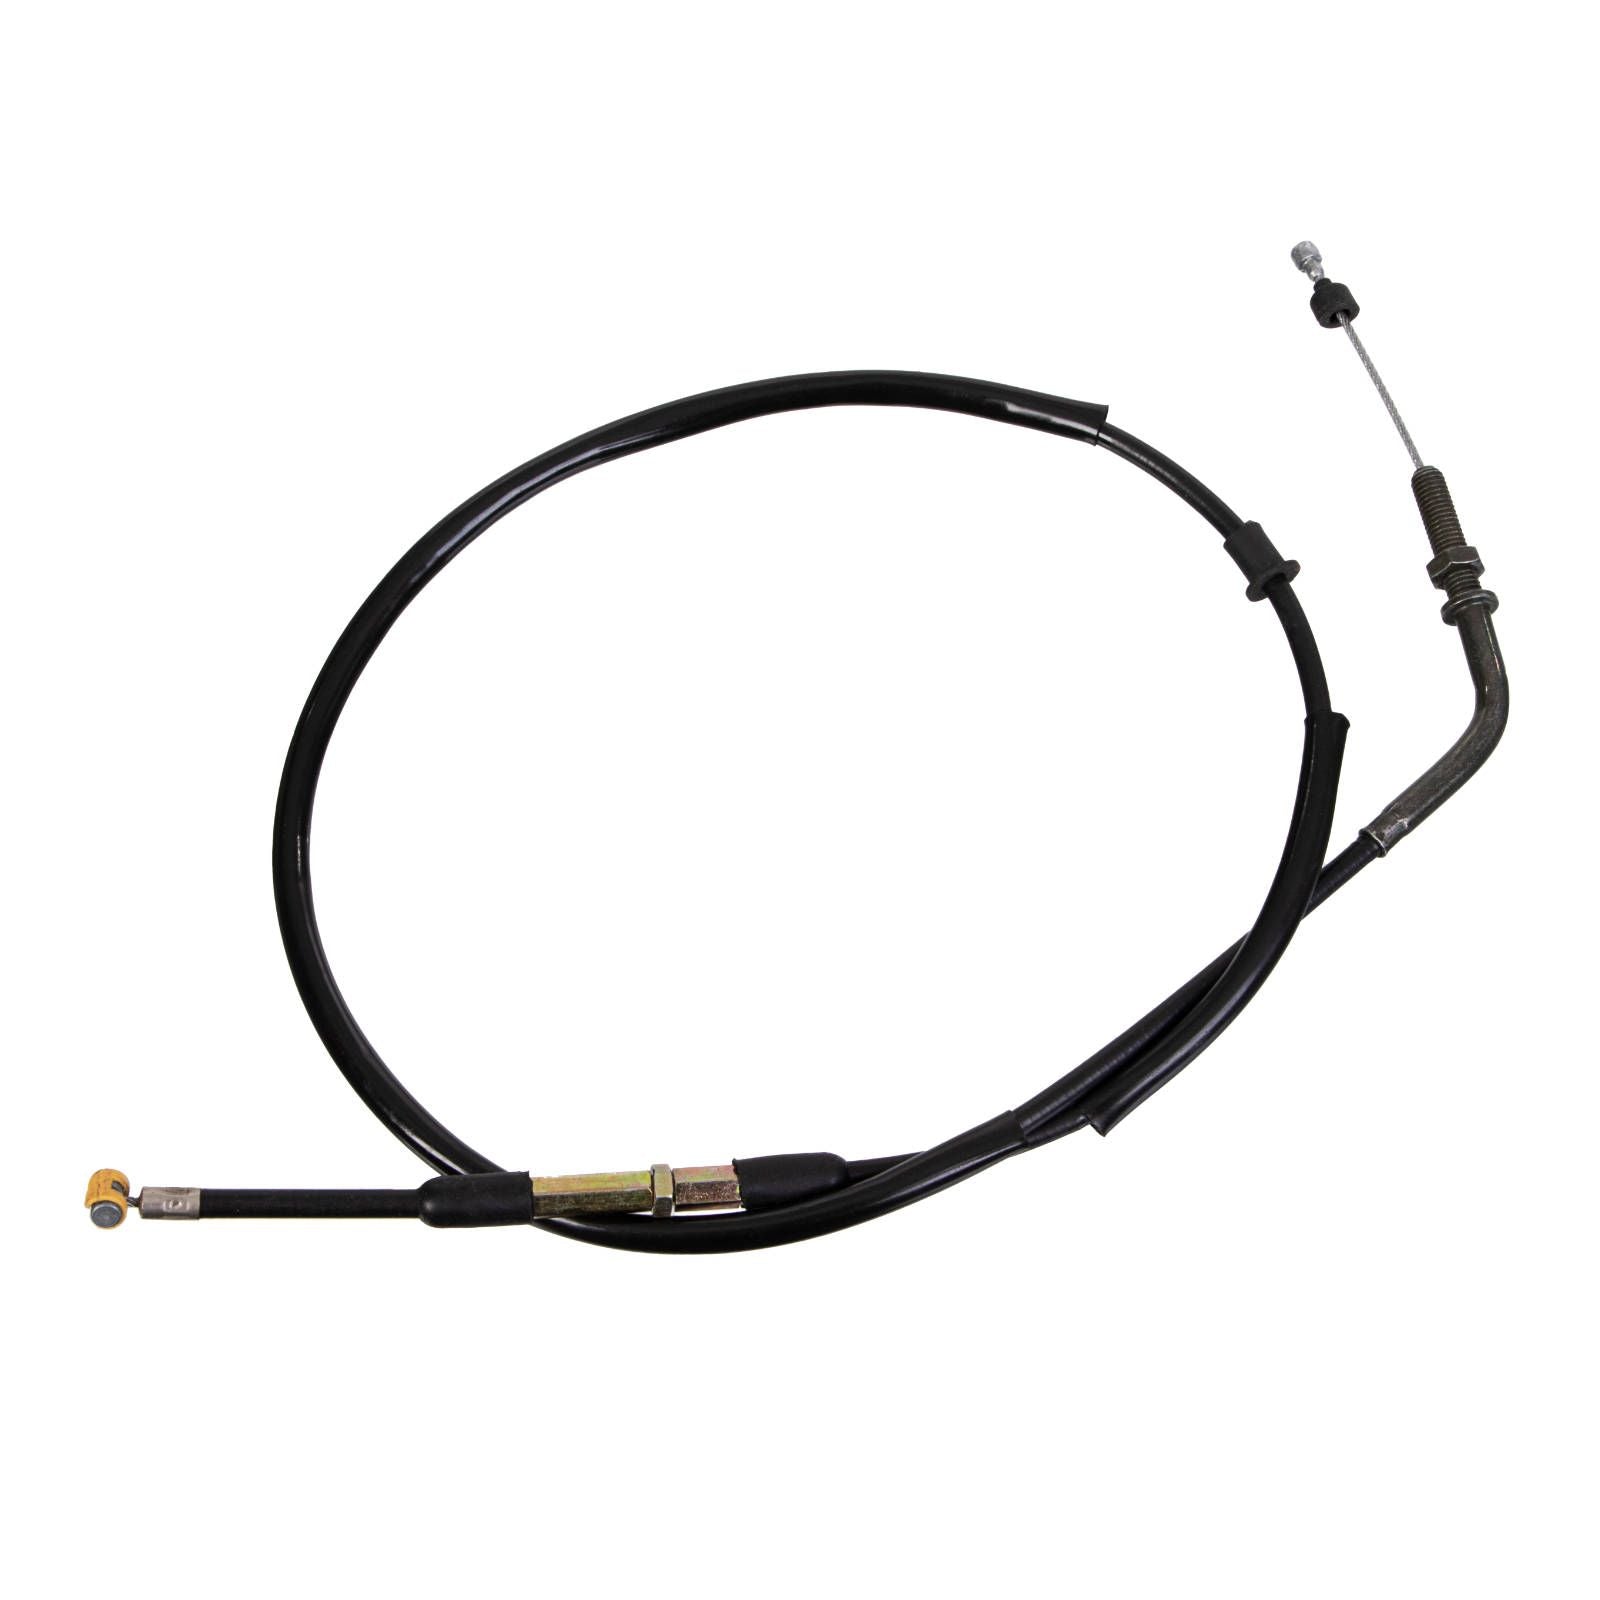 New WHITES Clutch Cable For Honda CRF250 2014-2017 #WPCC01030